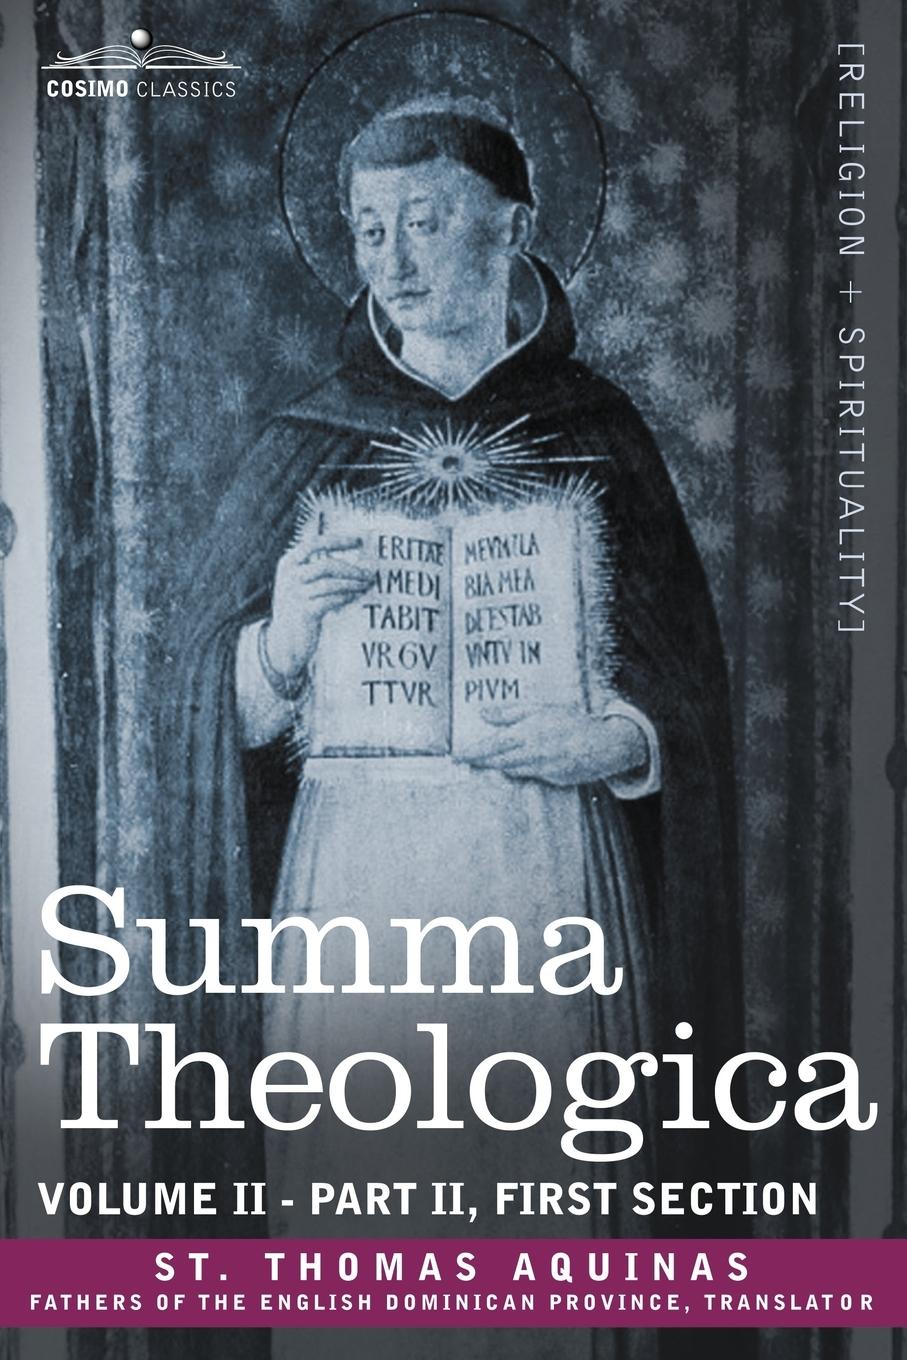 Summa Theologica, Volume 2 (Part II, First Section) - St Thomas Aquinas St Thomas Aquinas, Thomas Aquinas